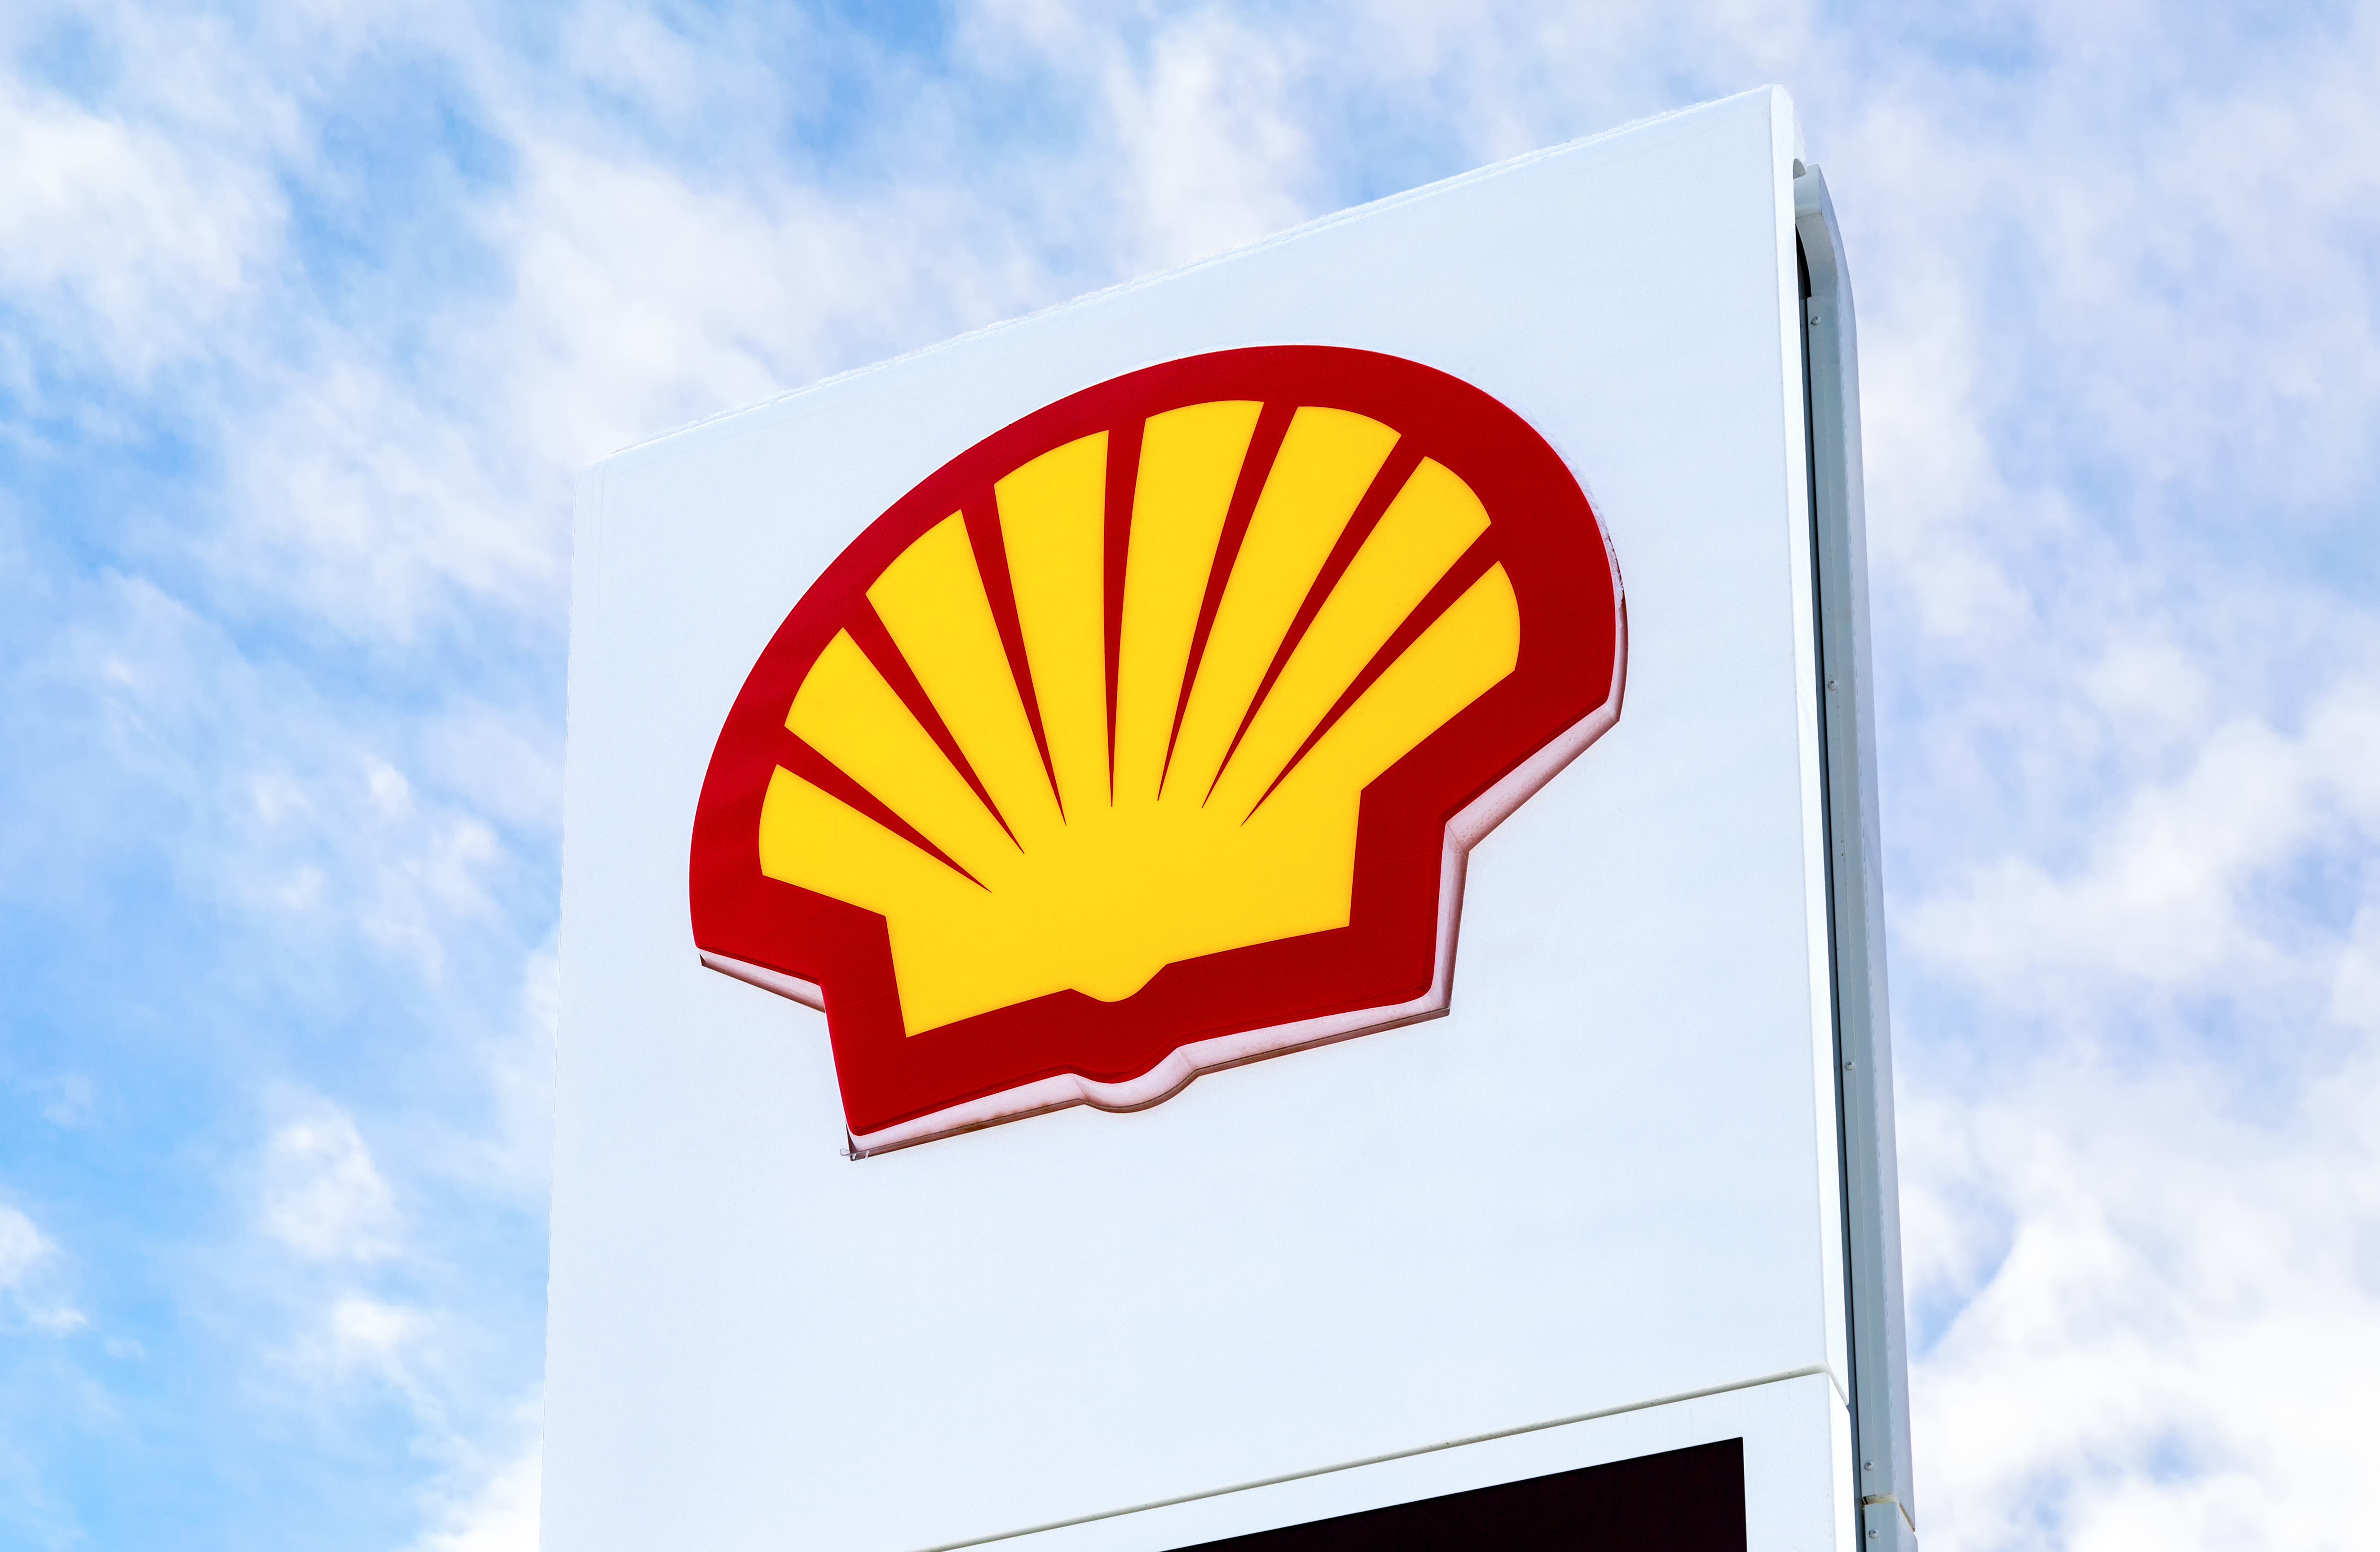 Shell Invests to Repurpose German Energy and Chemicals Park Rheinland